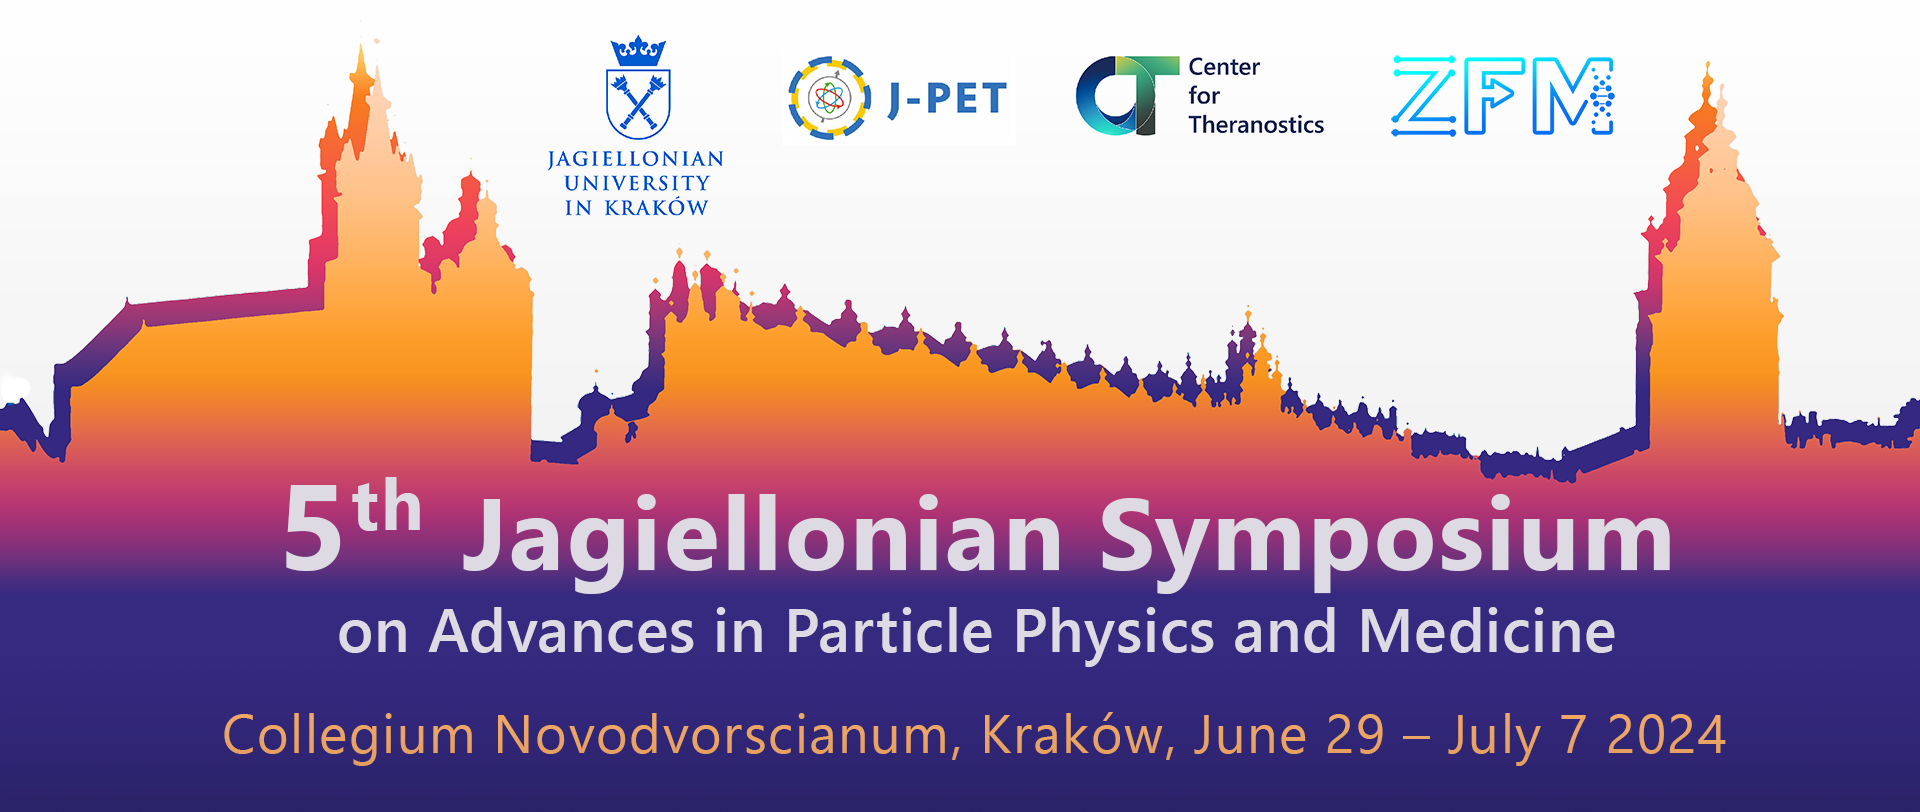 JS2024 : 5th Jagiellonian Symposium on Advances in Particle Physics and Medicine